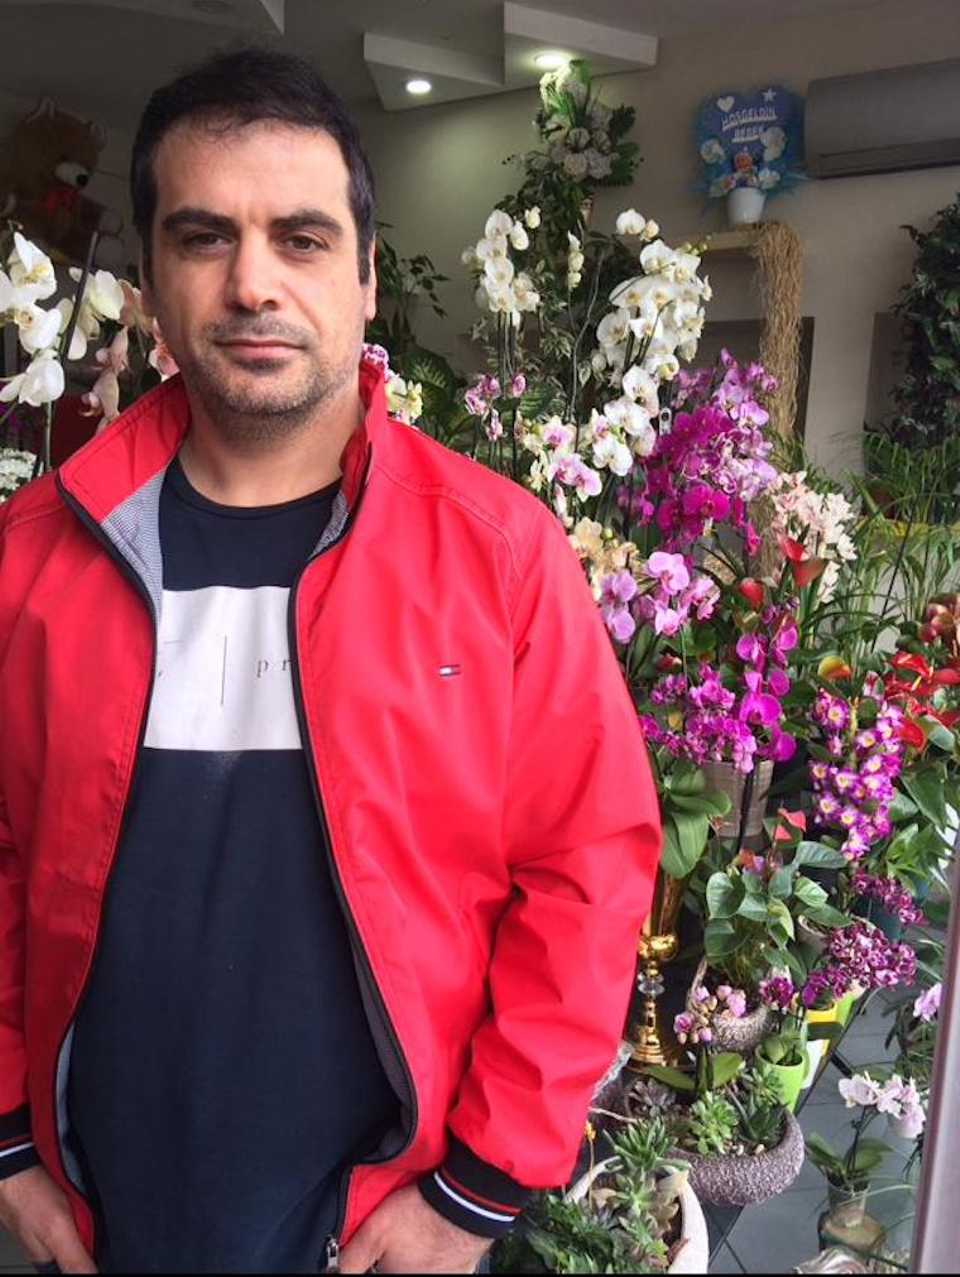 Tanfer Celik, a Turkish florist, has been in the business for more than 10 years. Despite having serious disruptions in the flower sector, he is still optimistic about the business after the pandemic.